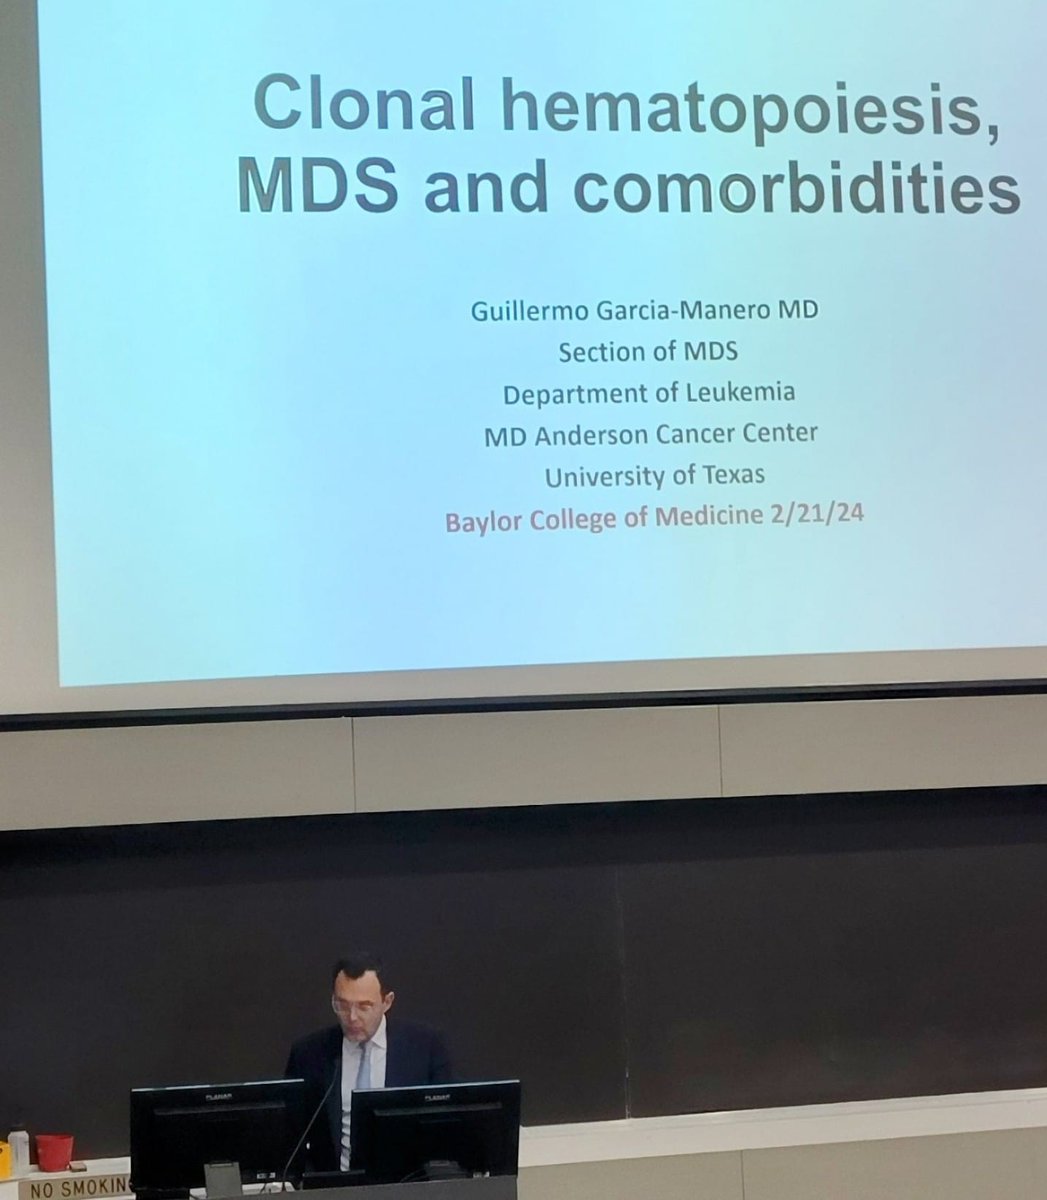 It was a privilege to have Dr. @garciamanero talk about the common pathways between MDS and cardiac conditions at @bcmhouston @BCM_CVRI. Excited for future collaborations! @XWehrens @anita_deswal